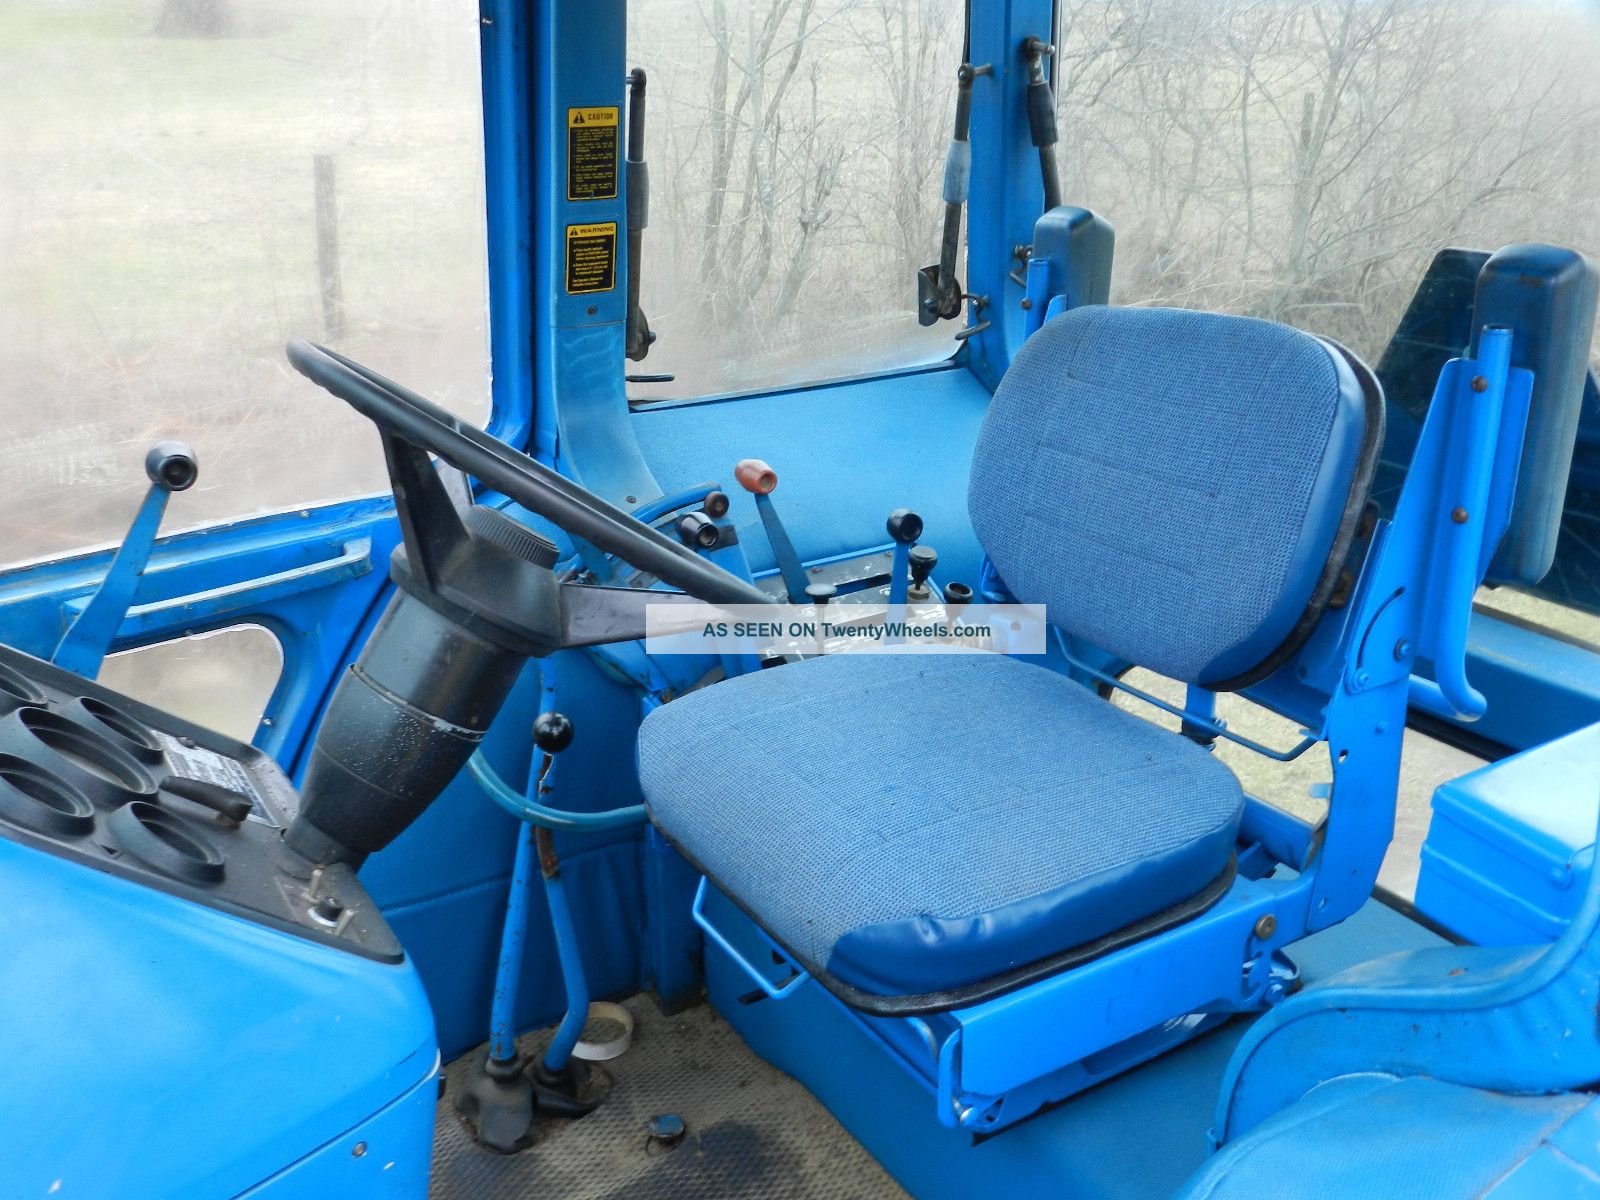 Ford Tw 10 Tractor And Cab Diesel With